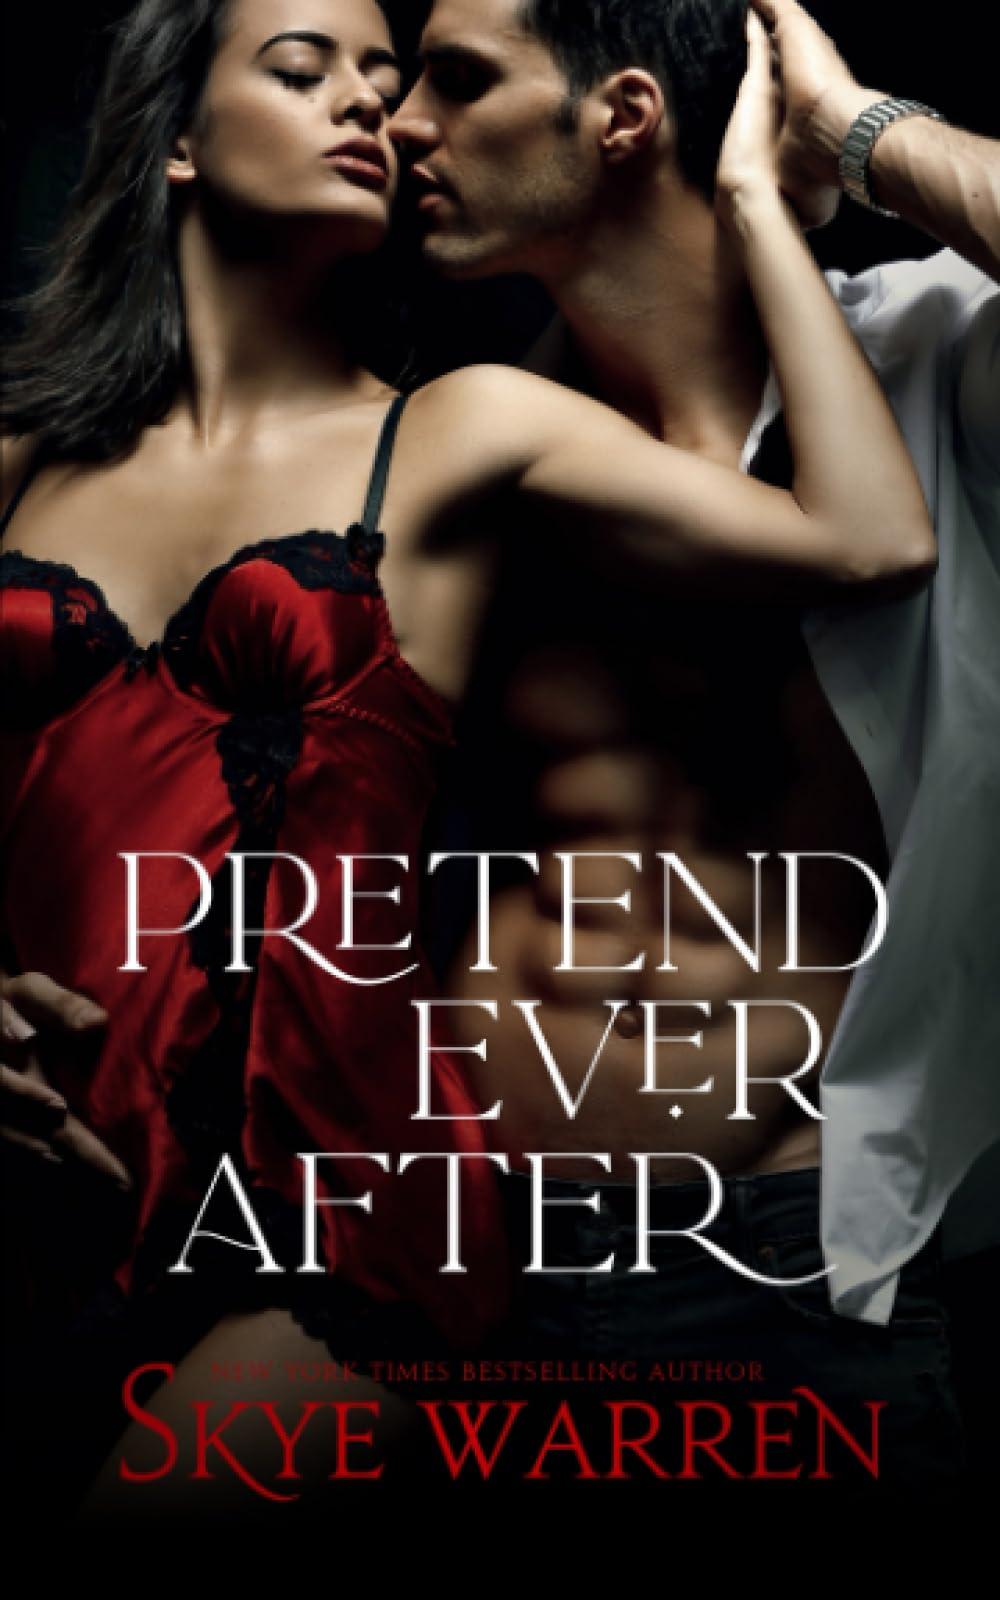 Pretend Ever After: A Fake Relationship Romance